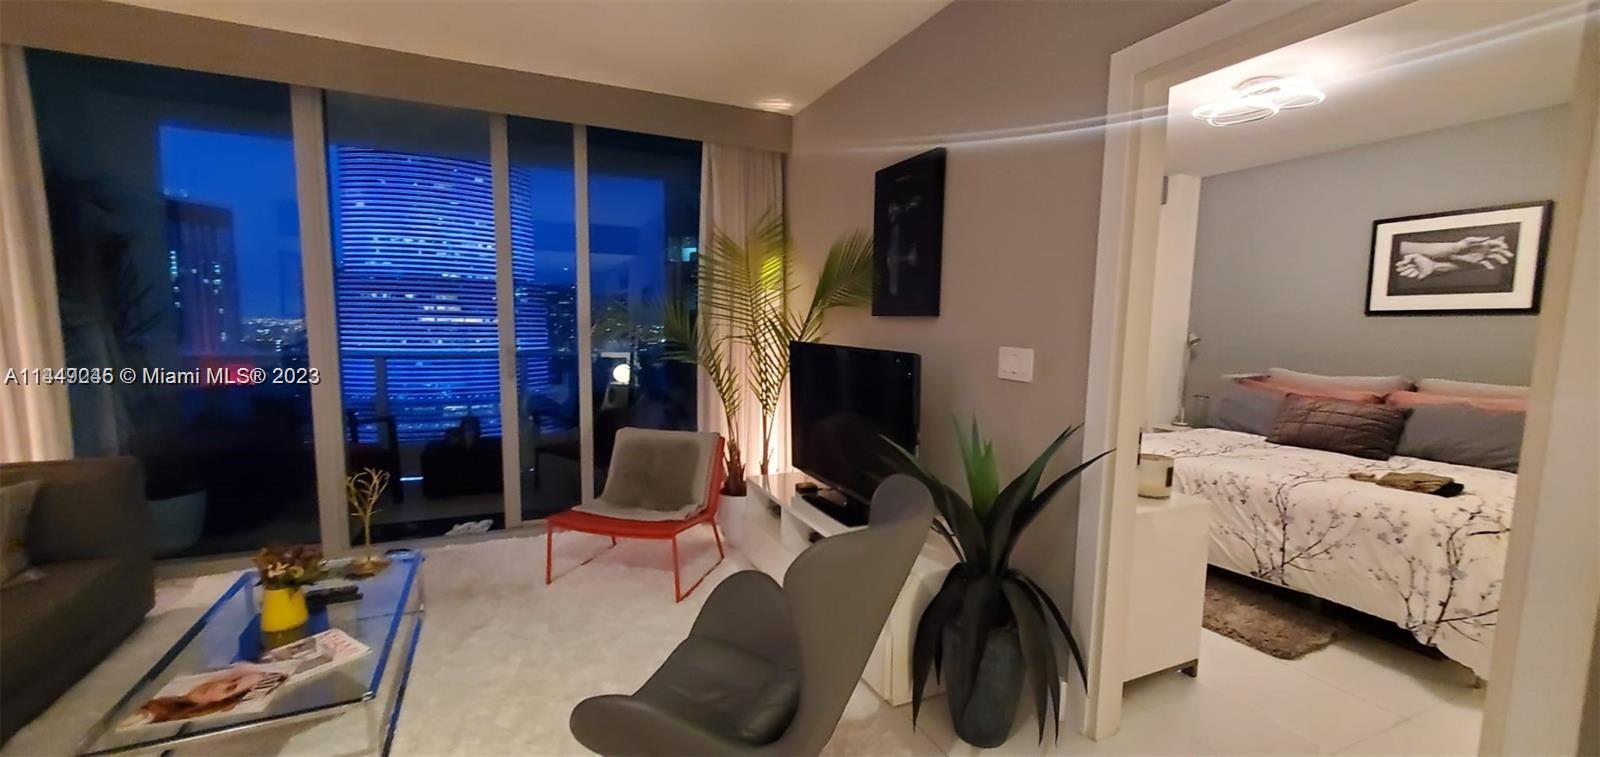 Gorgeous furnished modern unit with many custom designer-added features such as lighting,exterior furniture,& paint.Epic 34th Floor,1/1.5 w/oversized balcony,10-foot high ceilings,& 799SF.Rent short-term 30 Days+or 12X a year when not using,return on investment.Luxury state-of-the-art building located on the Miami River/Biscayne Bay & Brickell Downtown.Walk along the beautiful waterfront sidewalk or take the Metro Mover. 5-star amenities include:3 pools, a sauna, a jacuzzi, a fully equipped exercise facility, a yoga studio,walk to Brickell Citi Center,Miami Heat Arena,Whole Foods,& a luxury theater.Unit features Sub Zero & Meile appliances,white porcelain floors overlooking city views.World Famous Zuma & Area 31 Restaurant,24-hour room service,1 assign parking w/electrical outlet. *No Art*